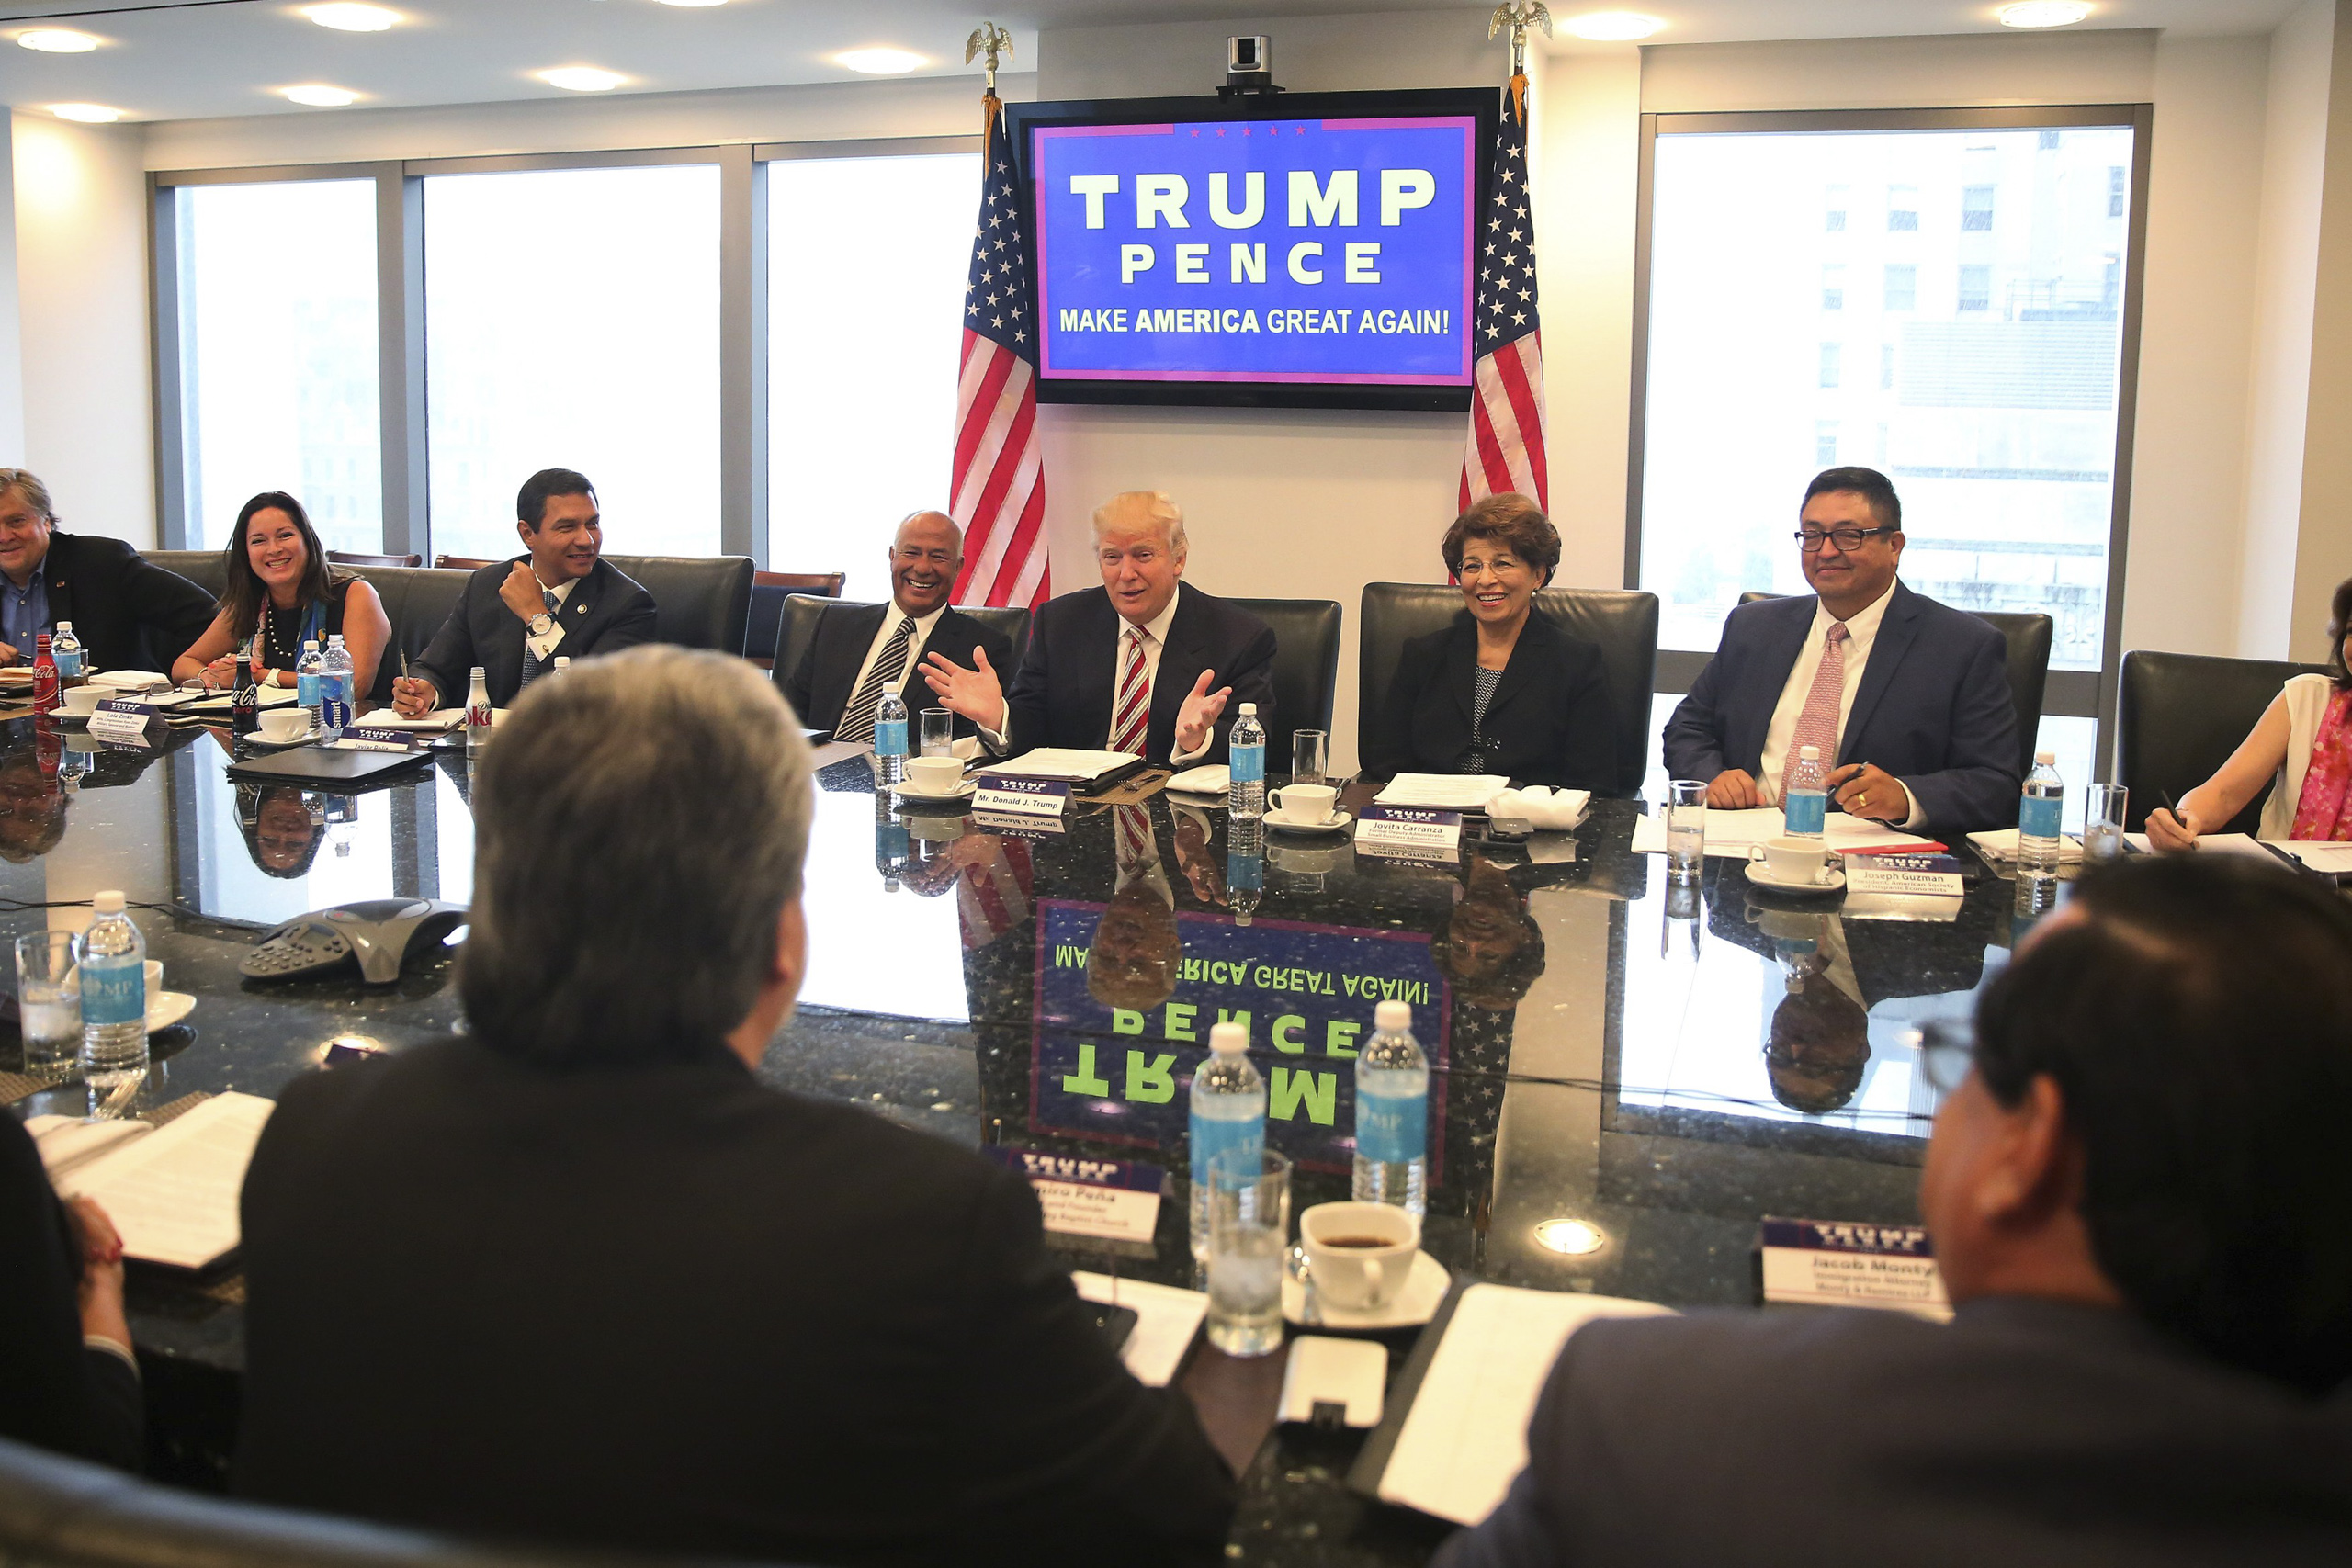 Republican presidential nominee Donald Trump speaks during a meeting with his Hispanic Advisory Council at Trump Tower in the Manhattan borough of New York City on Aug. 20, 2016. (Carlo Allegri—Reuters)